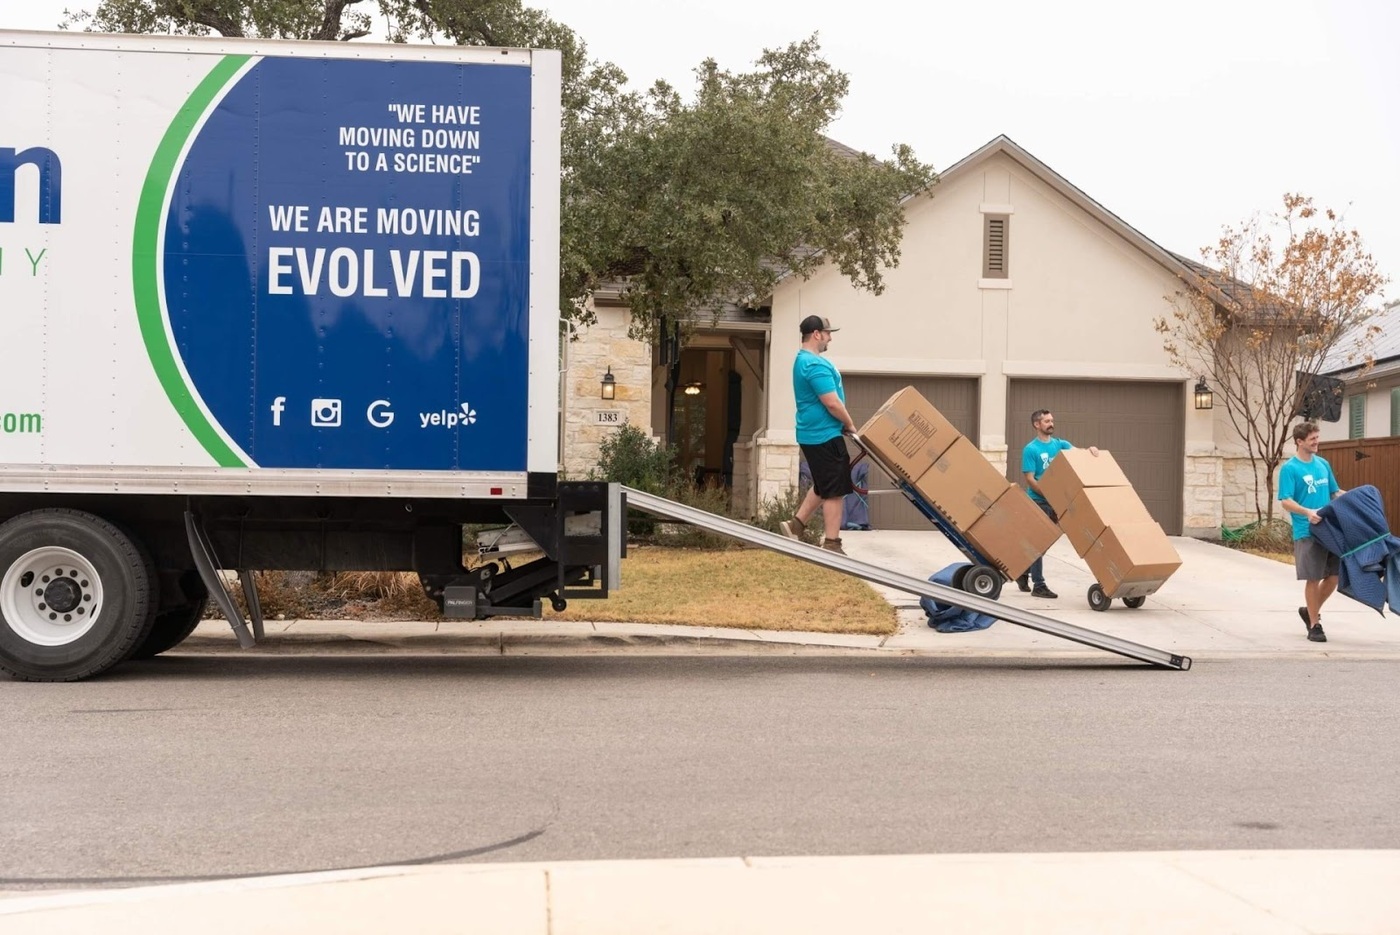 Evolution Moving Company is a team of residential and commercial movers offering local and long-distance moving, labor-only services, piano moving, packing services, and storage solutions. The company currently moves customers in and out of Schertz, Dallas, Richardson, Garland, Converse, San Antonio, Saginaw, Haltom City, Richland Hills, Fort Worth, Austin, and New Braunfels in Texas